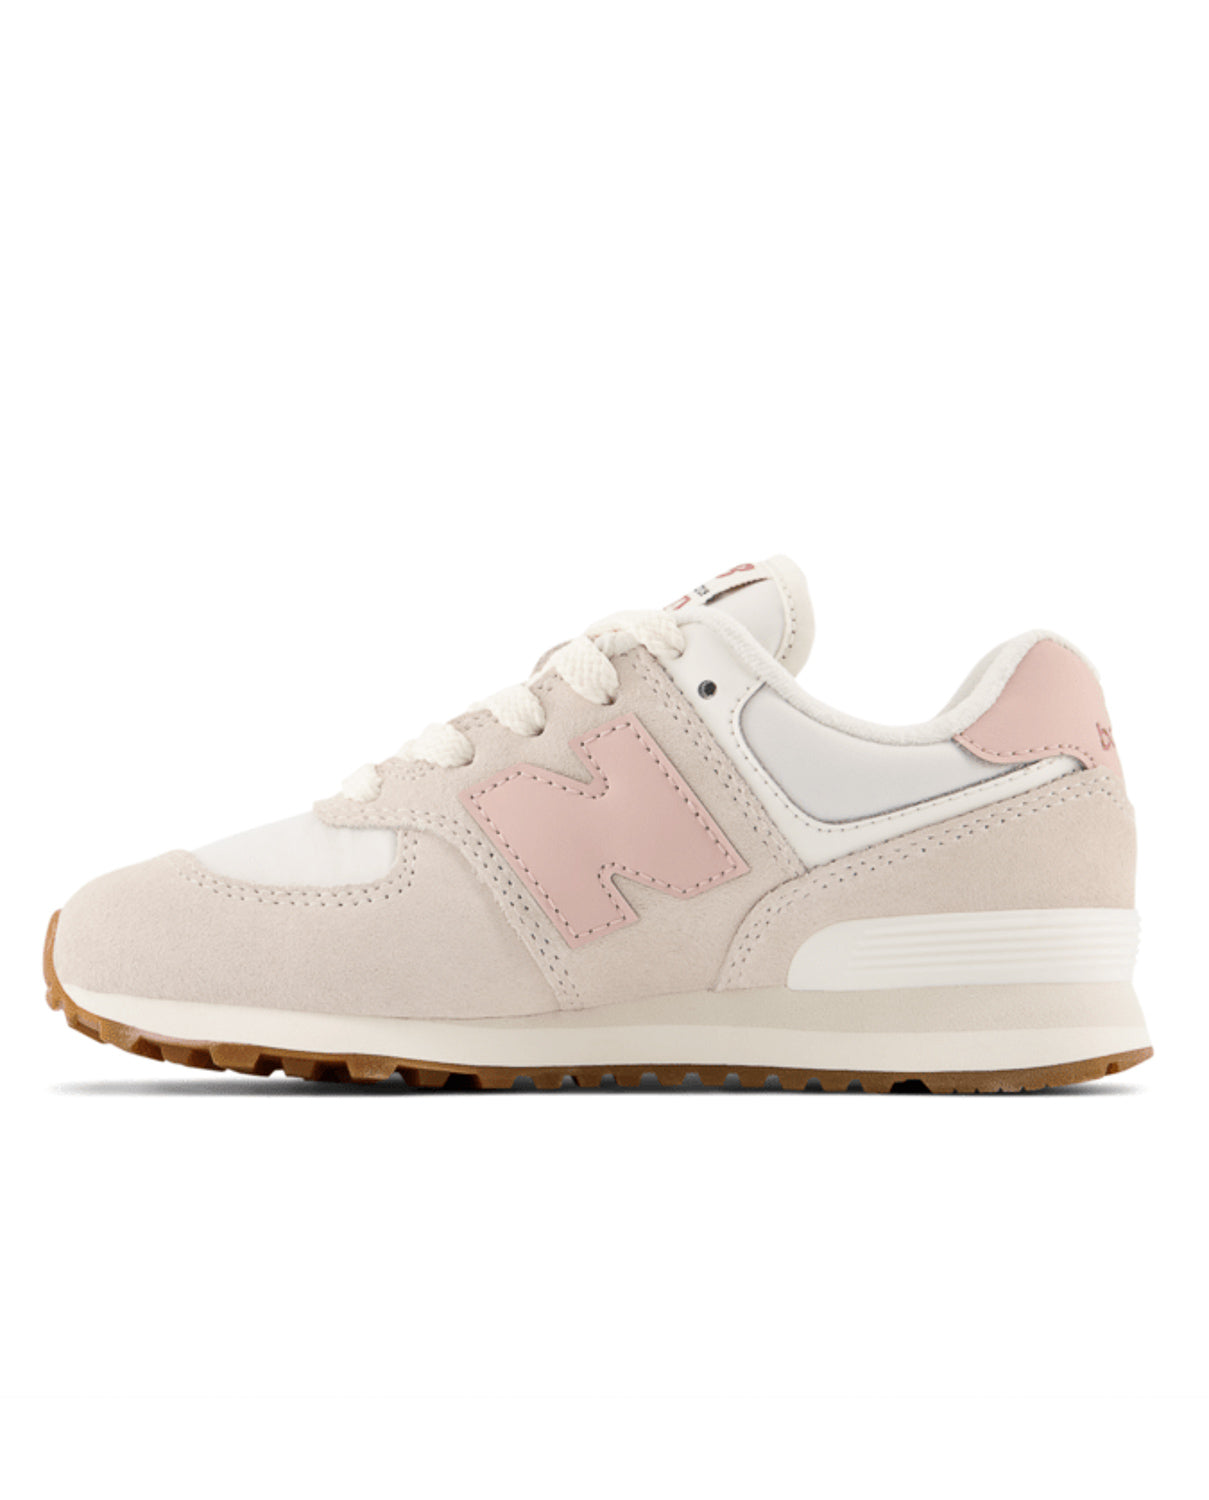 New Balance PC574RP1 Lacets, Sneakers Cadet, New Balance